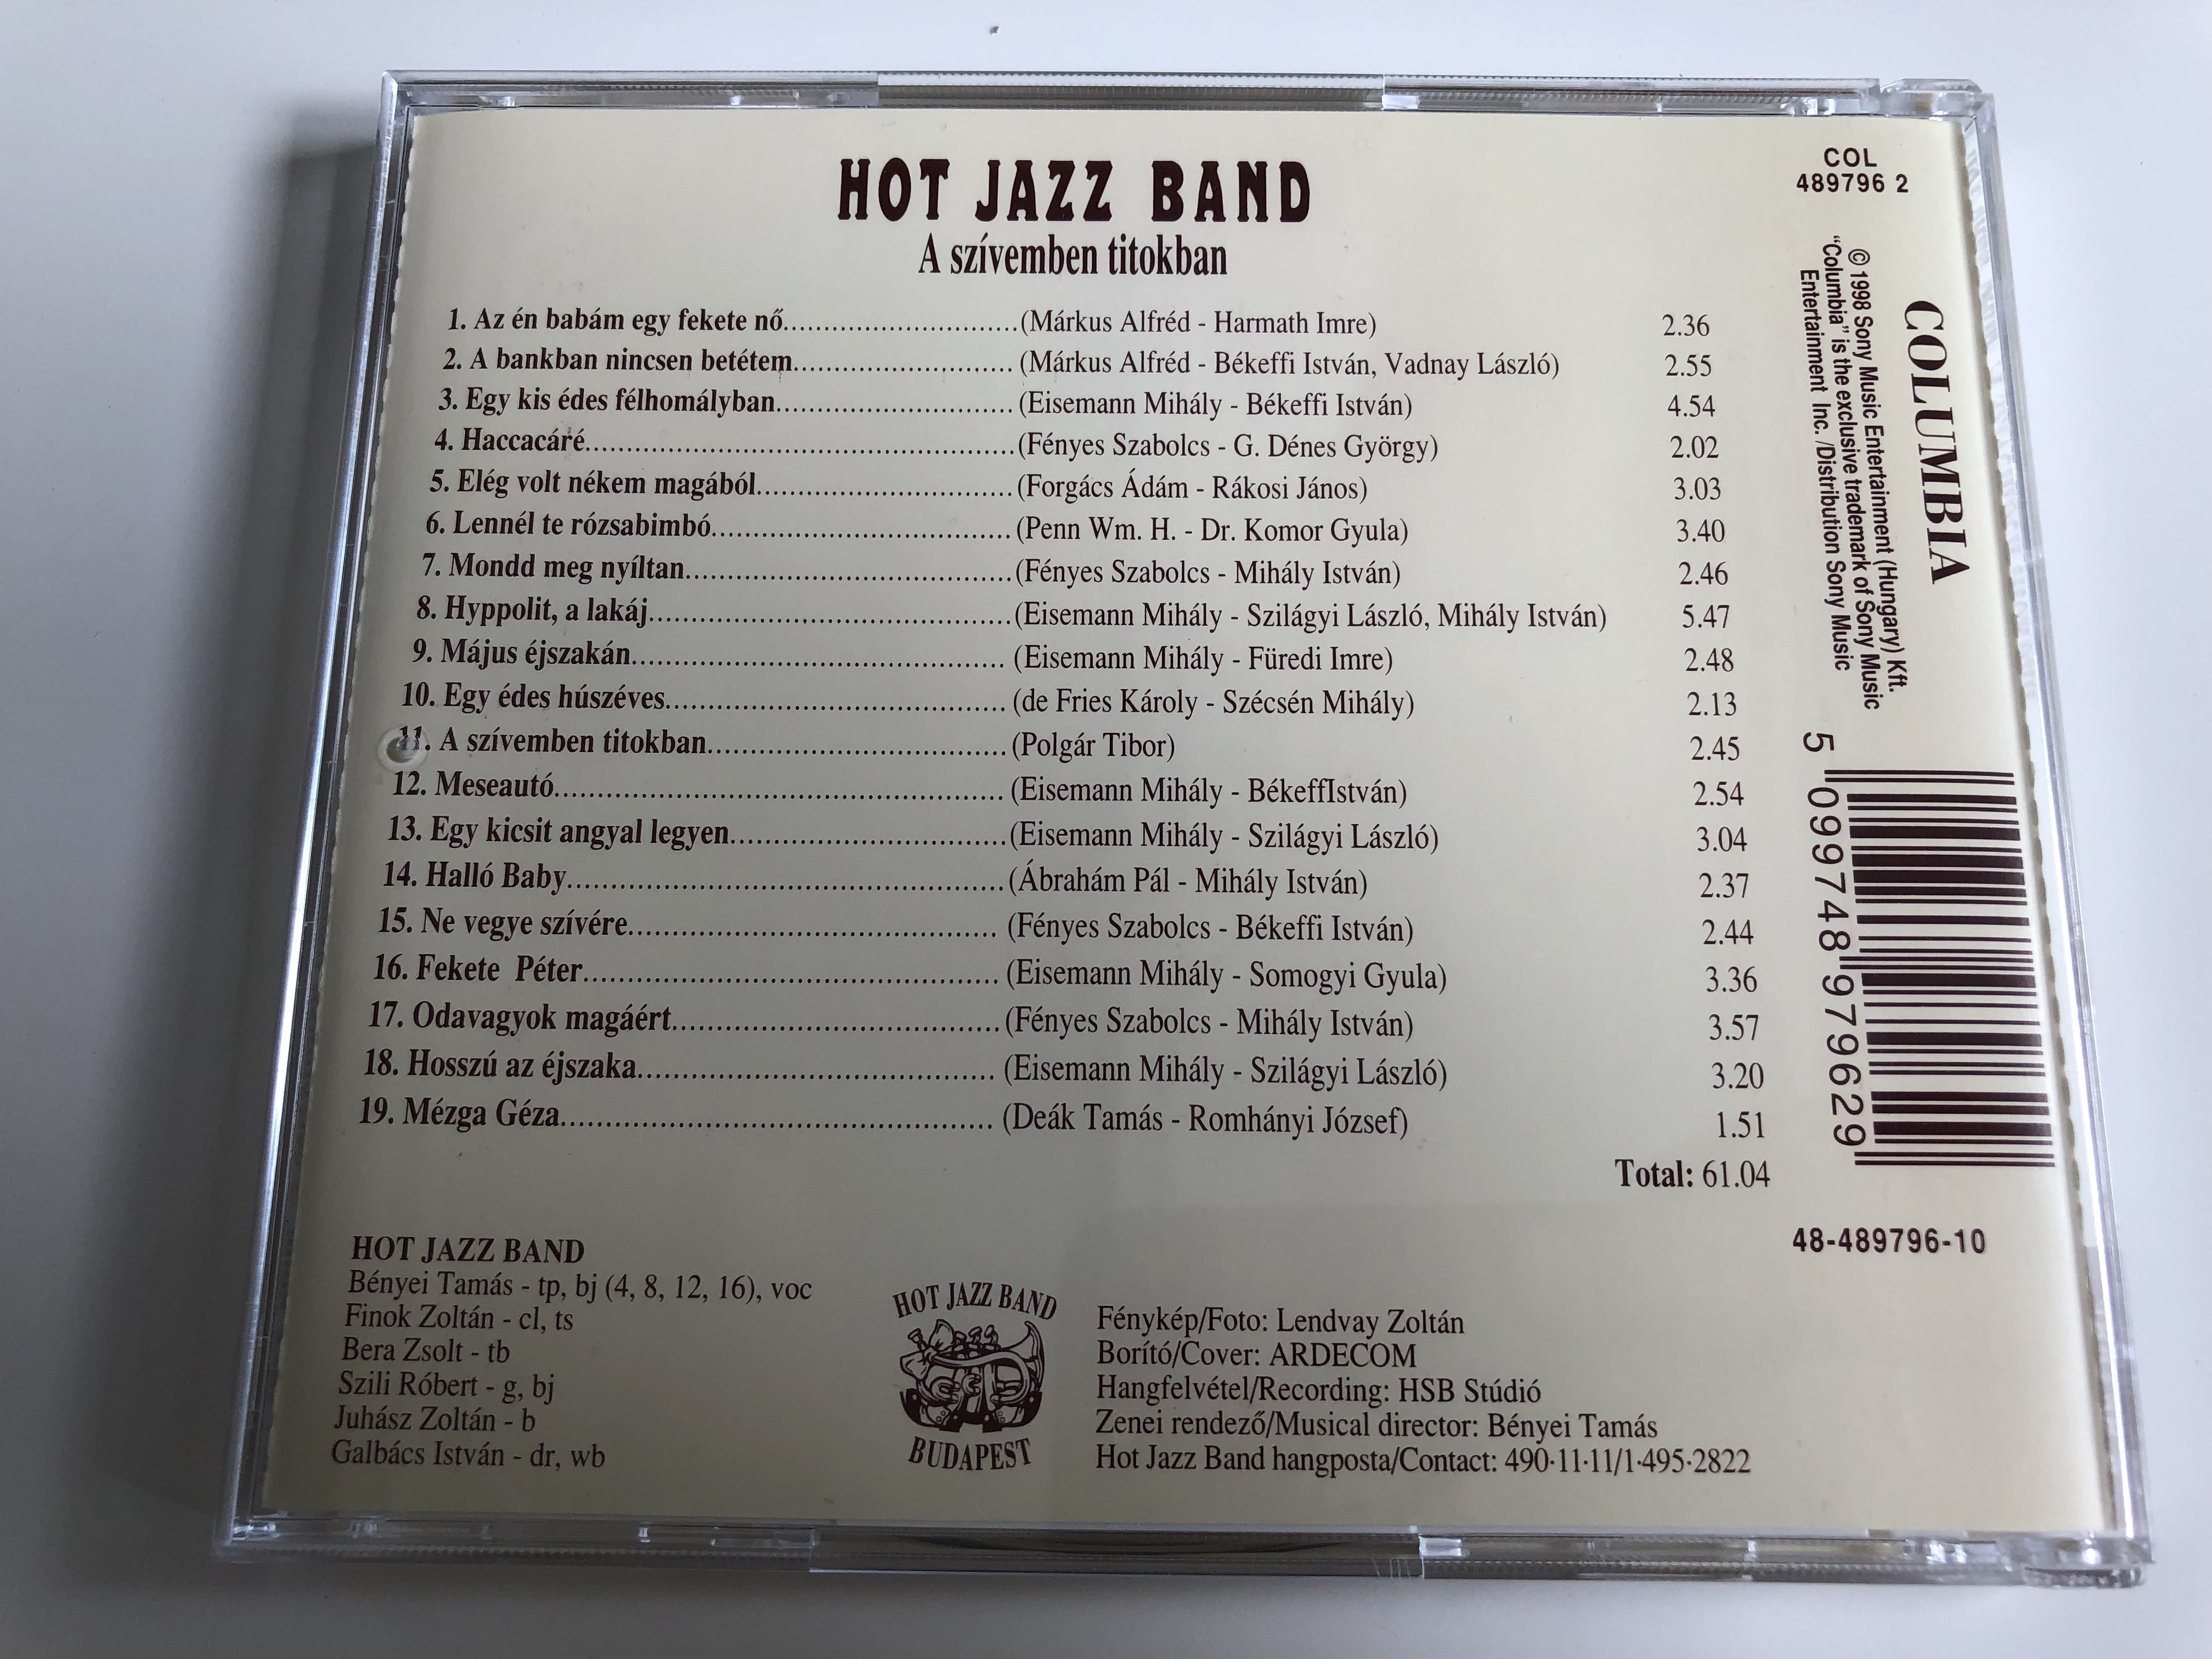 hot-jazz-band-a-sz-vemben-titokban-hungarian-popular-music-of-the-30s-and-40s-columbia-col-4897962-audio-cd-1998-8-.jpg